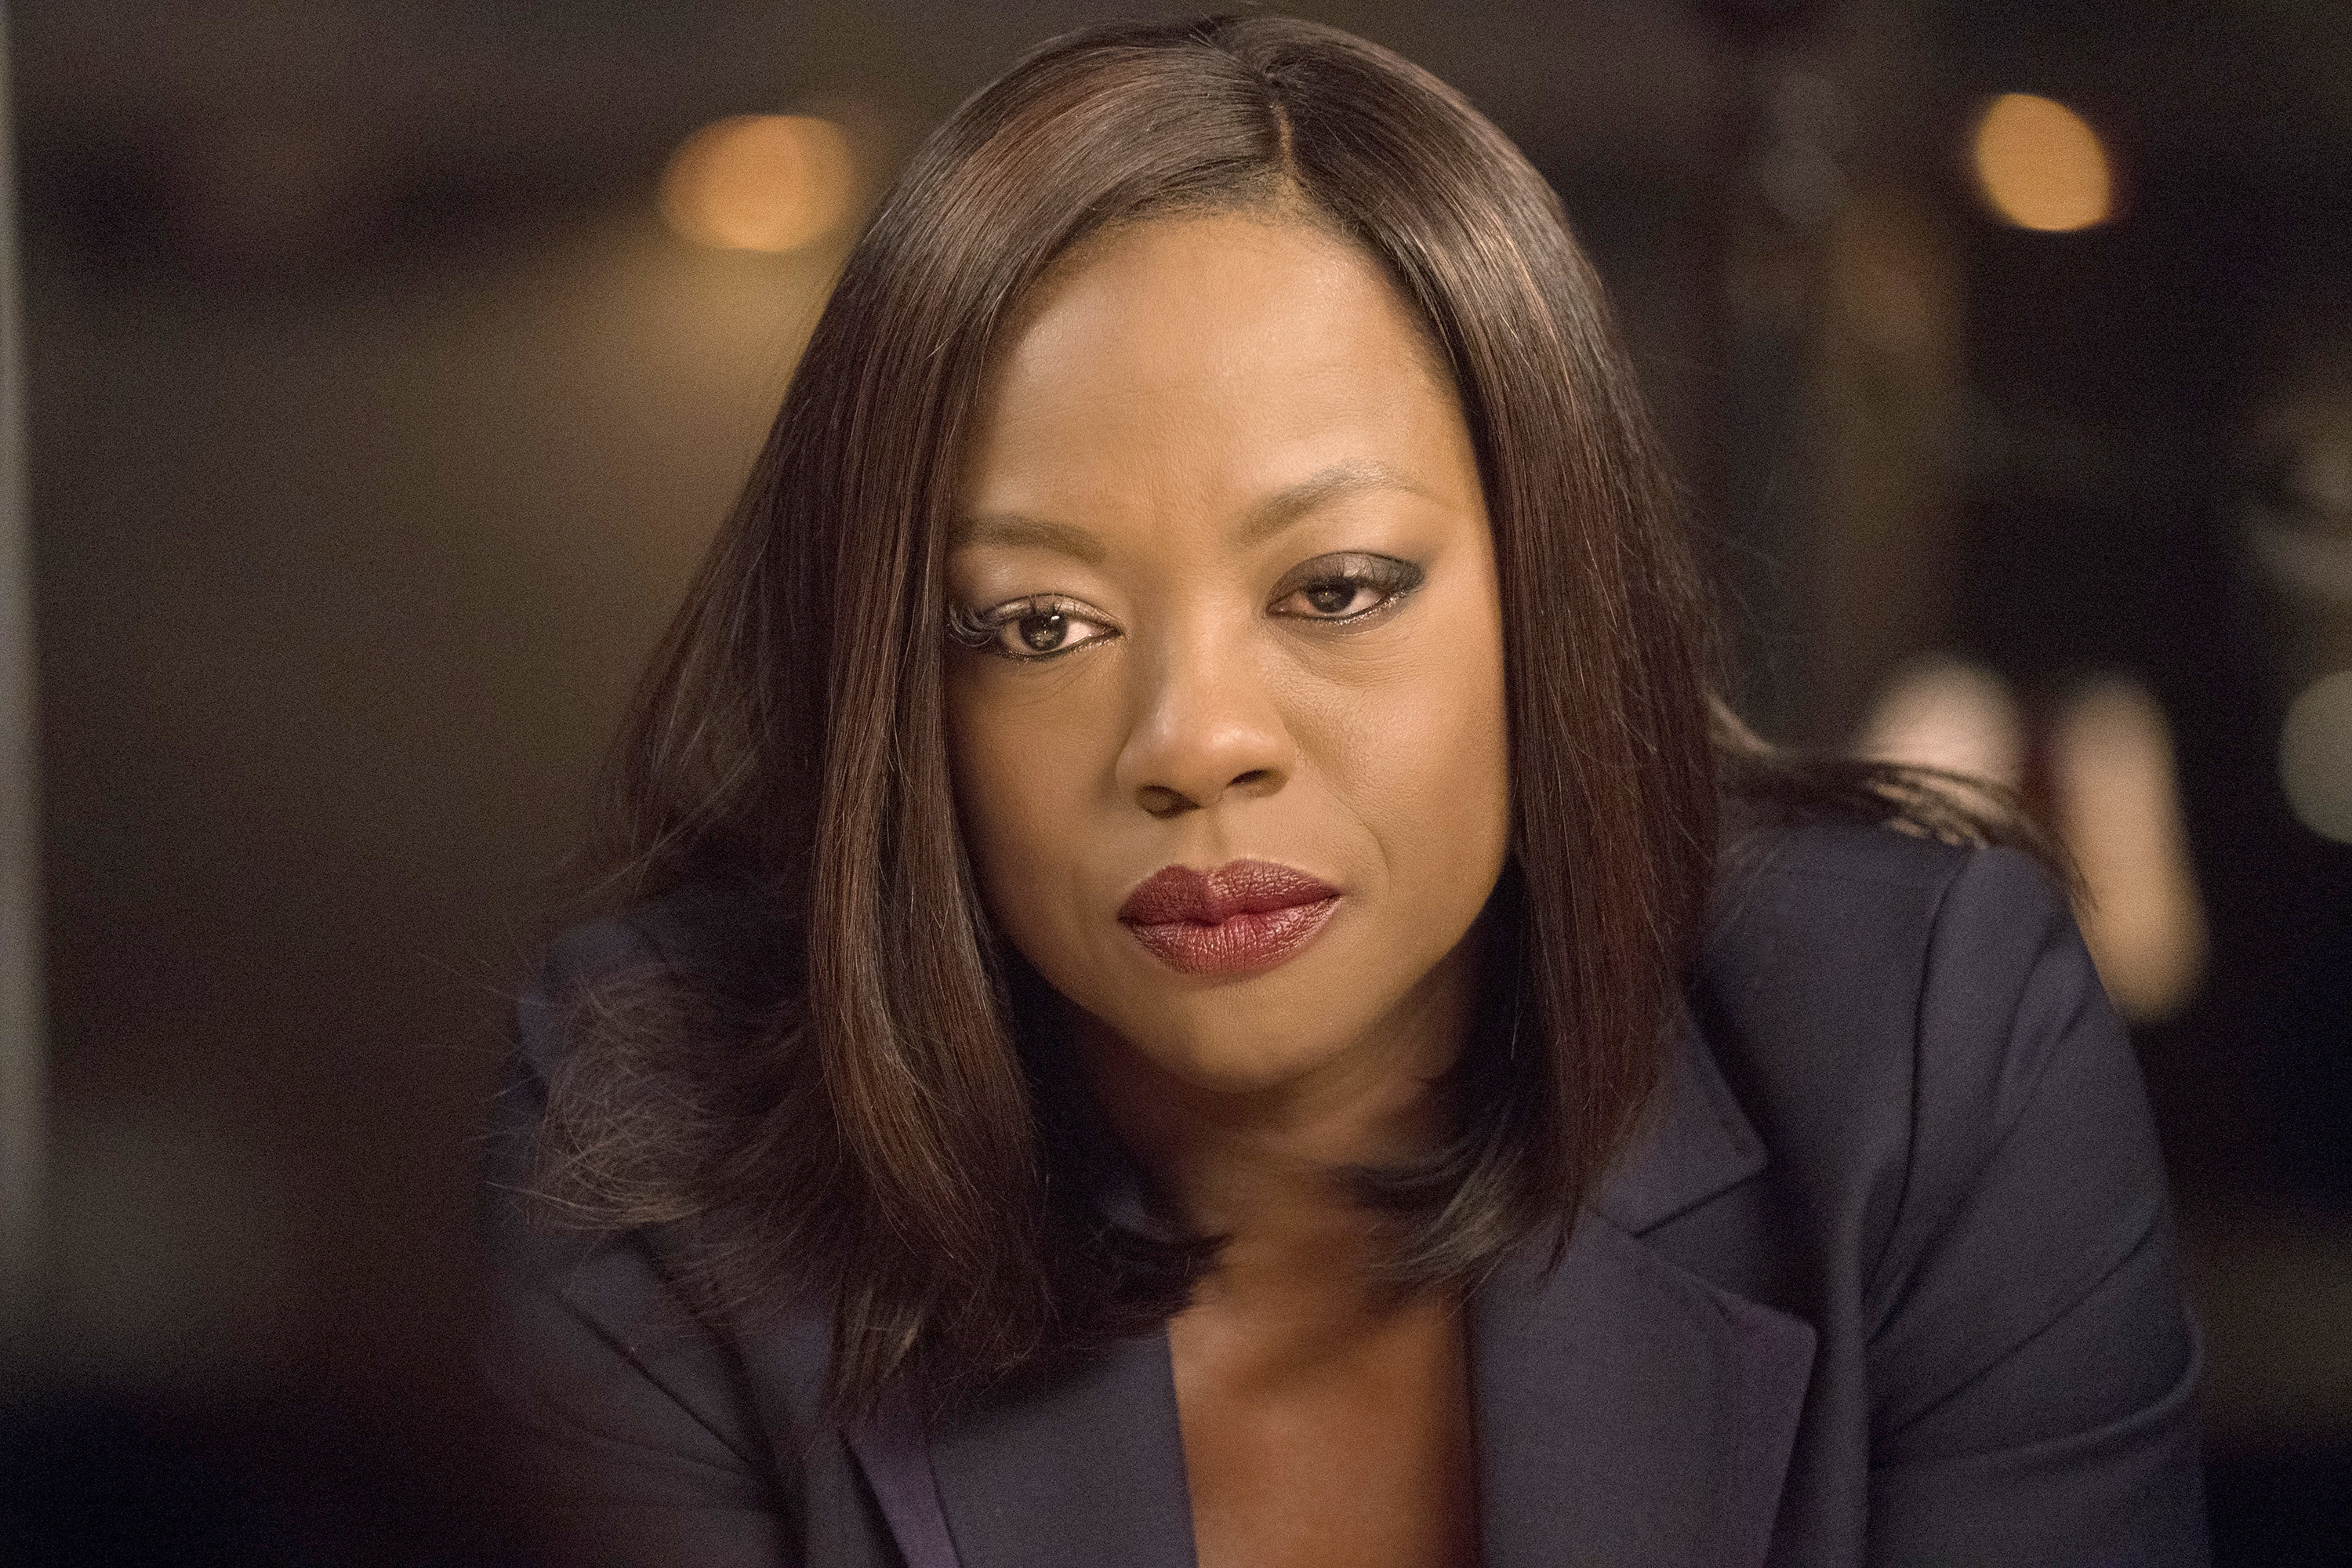 Annalise, played by Viola Davis, is wearing a red lip and a blazer while looking into the distance